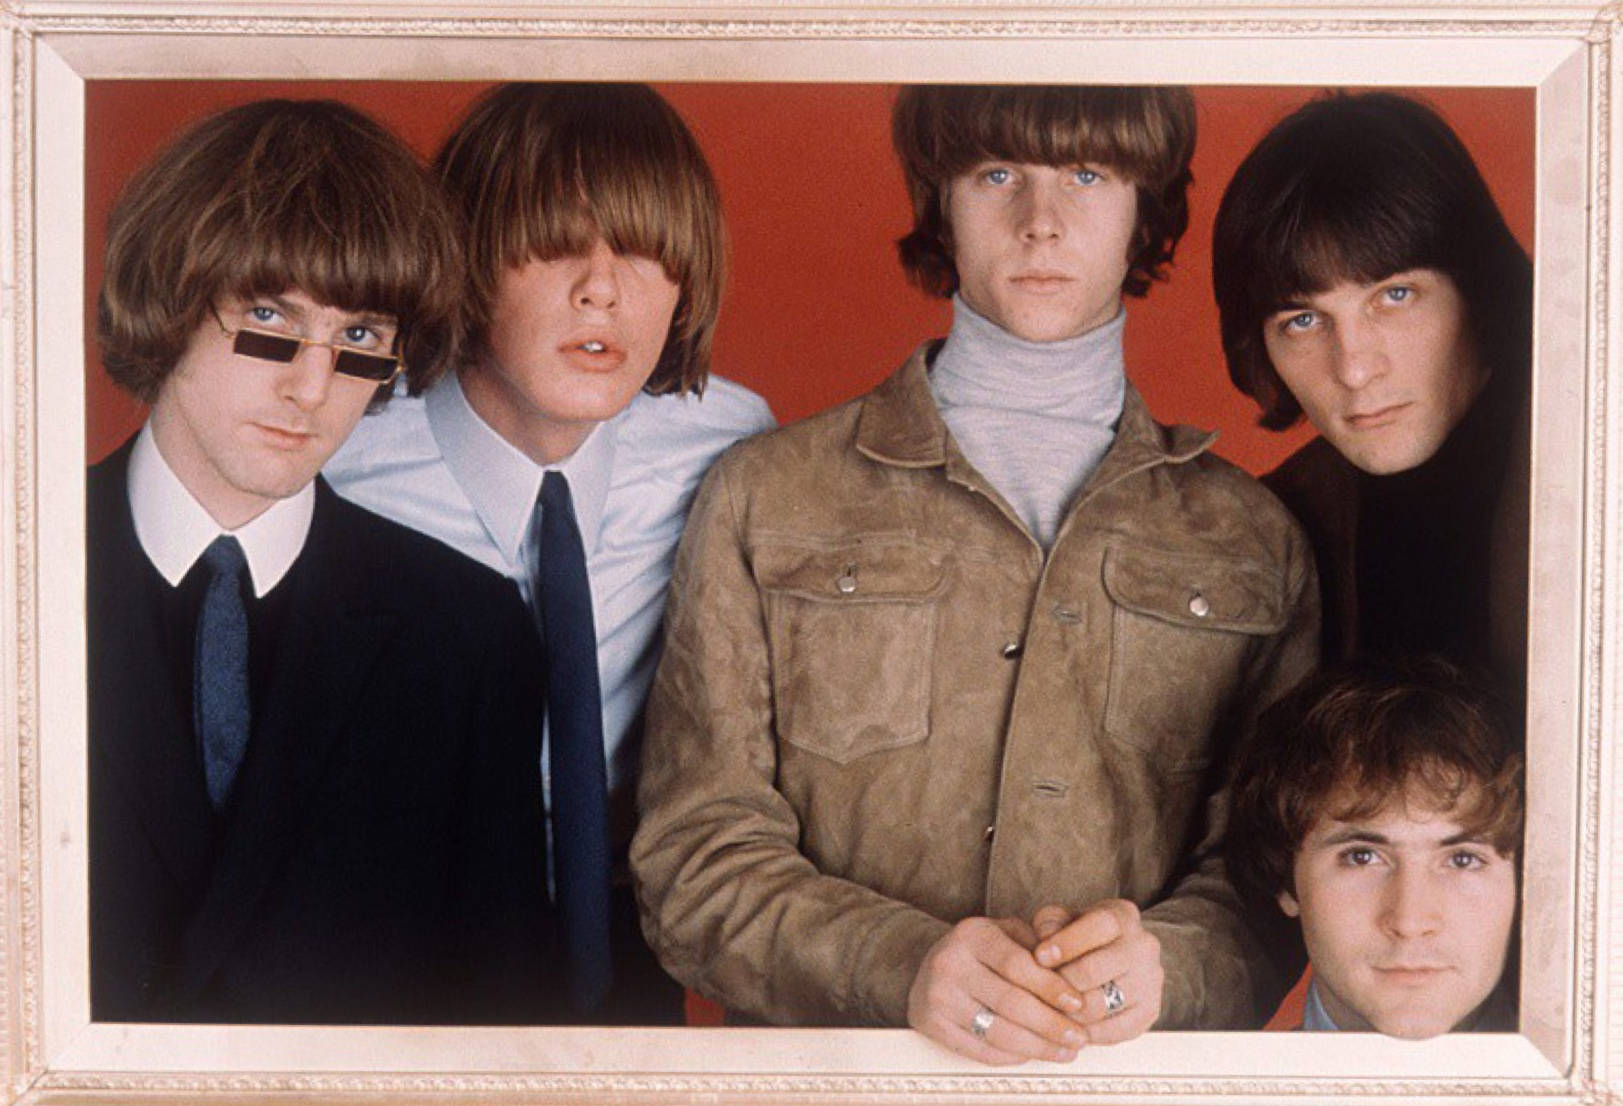 Iconic Rock Band - The Byrds Performing on Stage Wallpaper